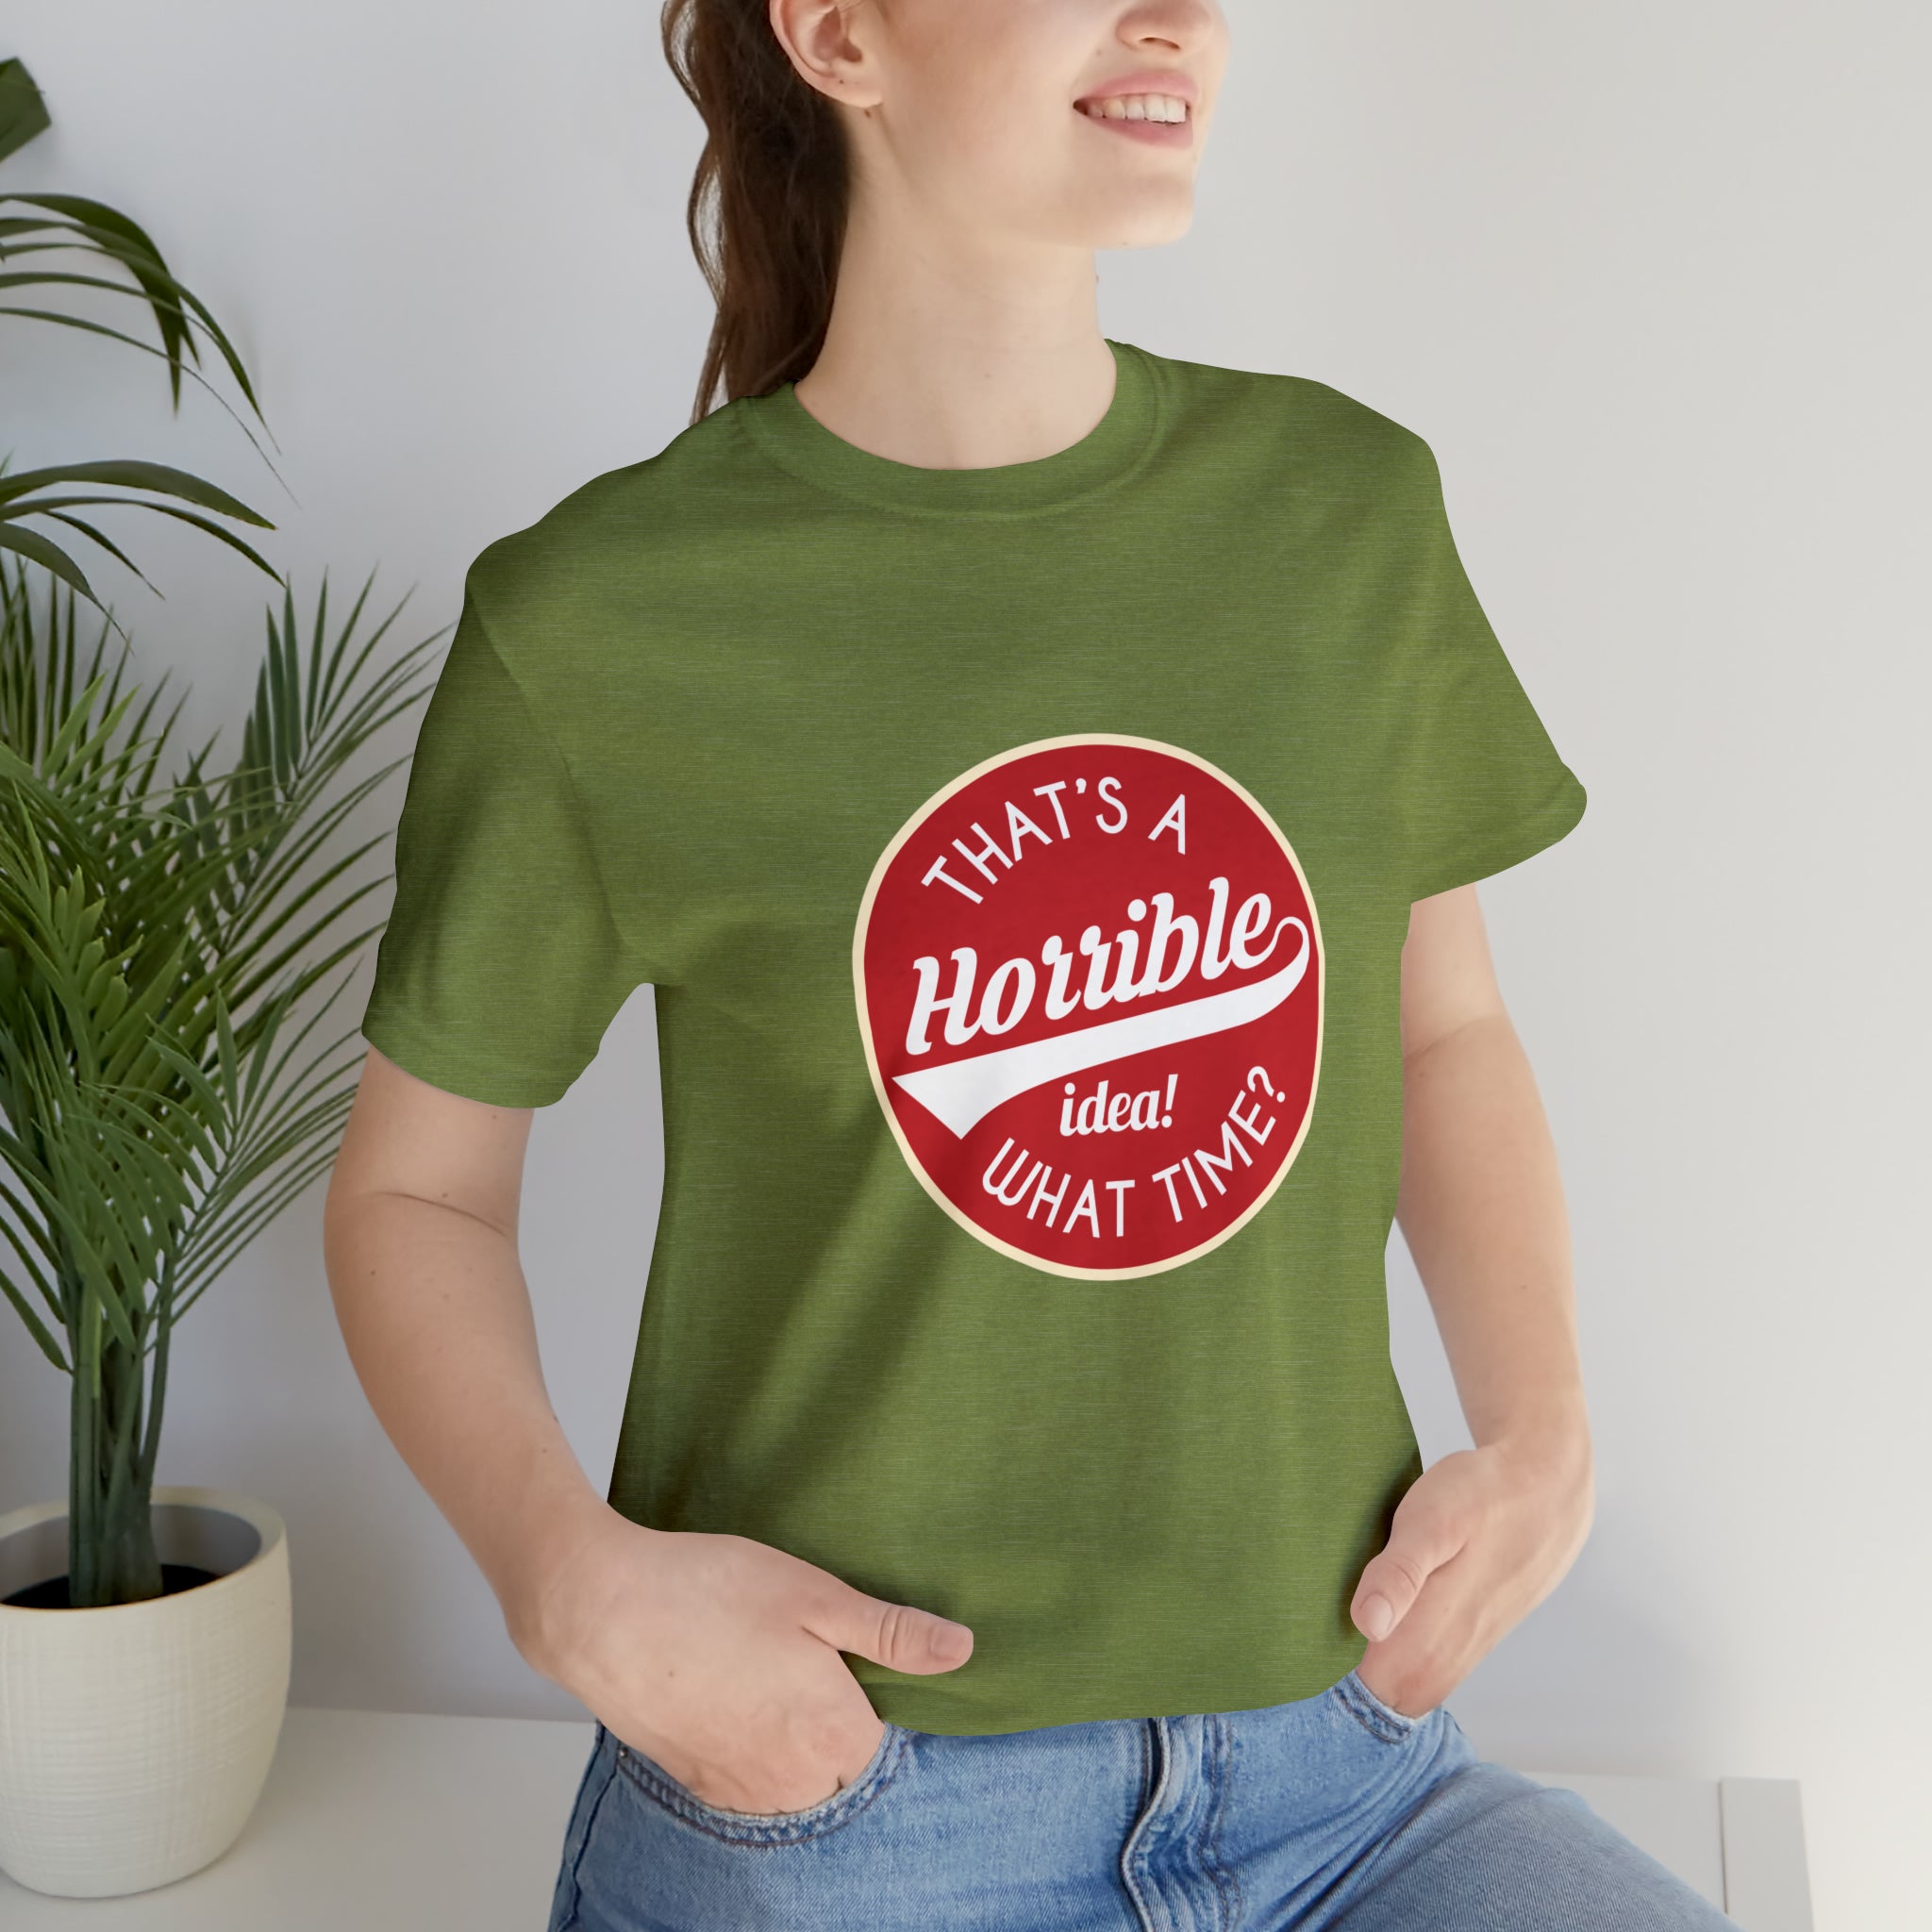 That's a horrible idea - what time T-Shirt